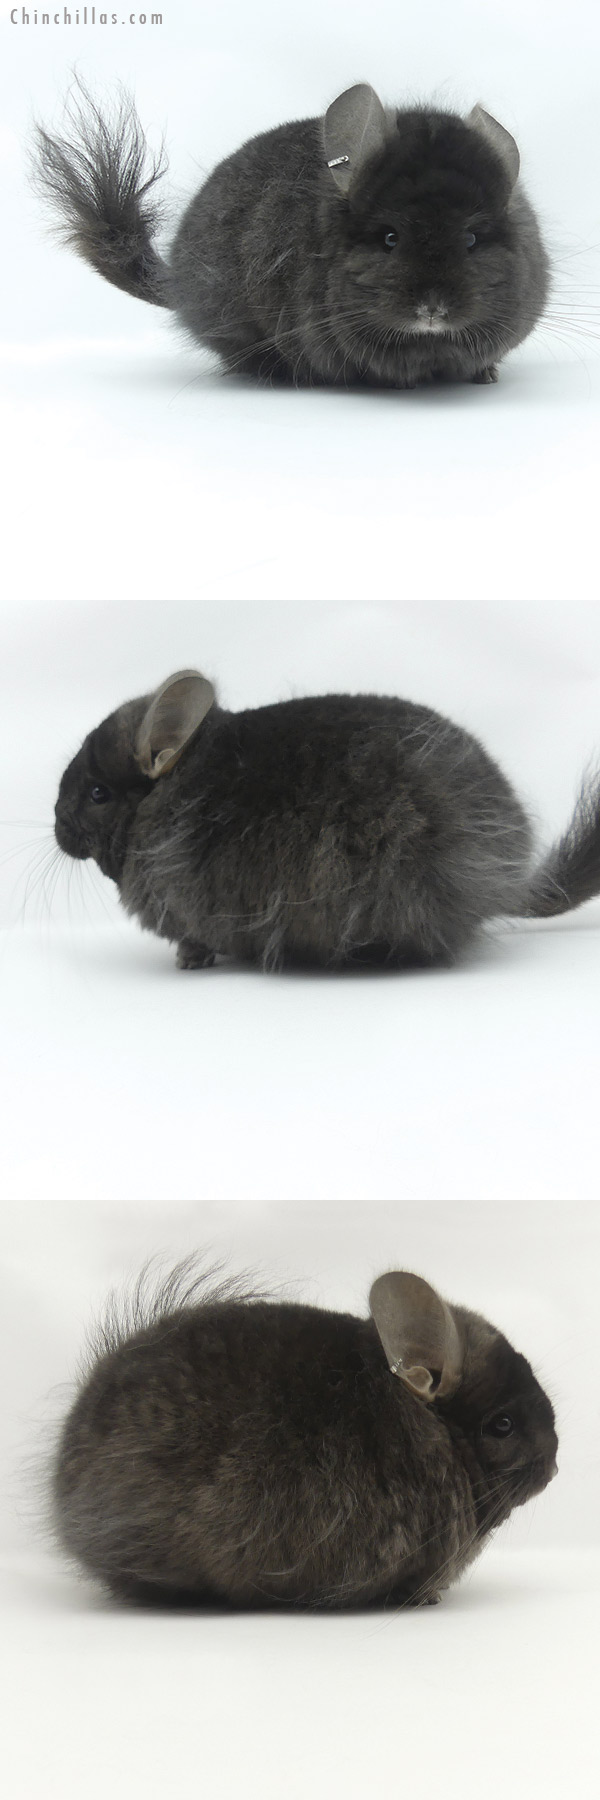 Chinchilla or related item offered for sale or export on Chinchillas.com - 20056 Ebony ( Locken Carrier )  Royal Persian Angora Male Chinchilla